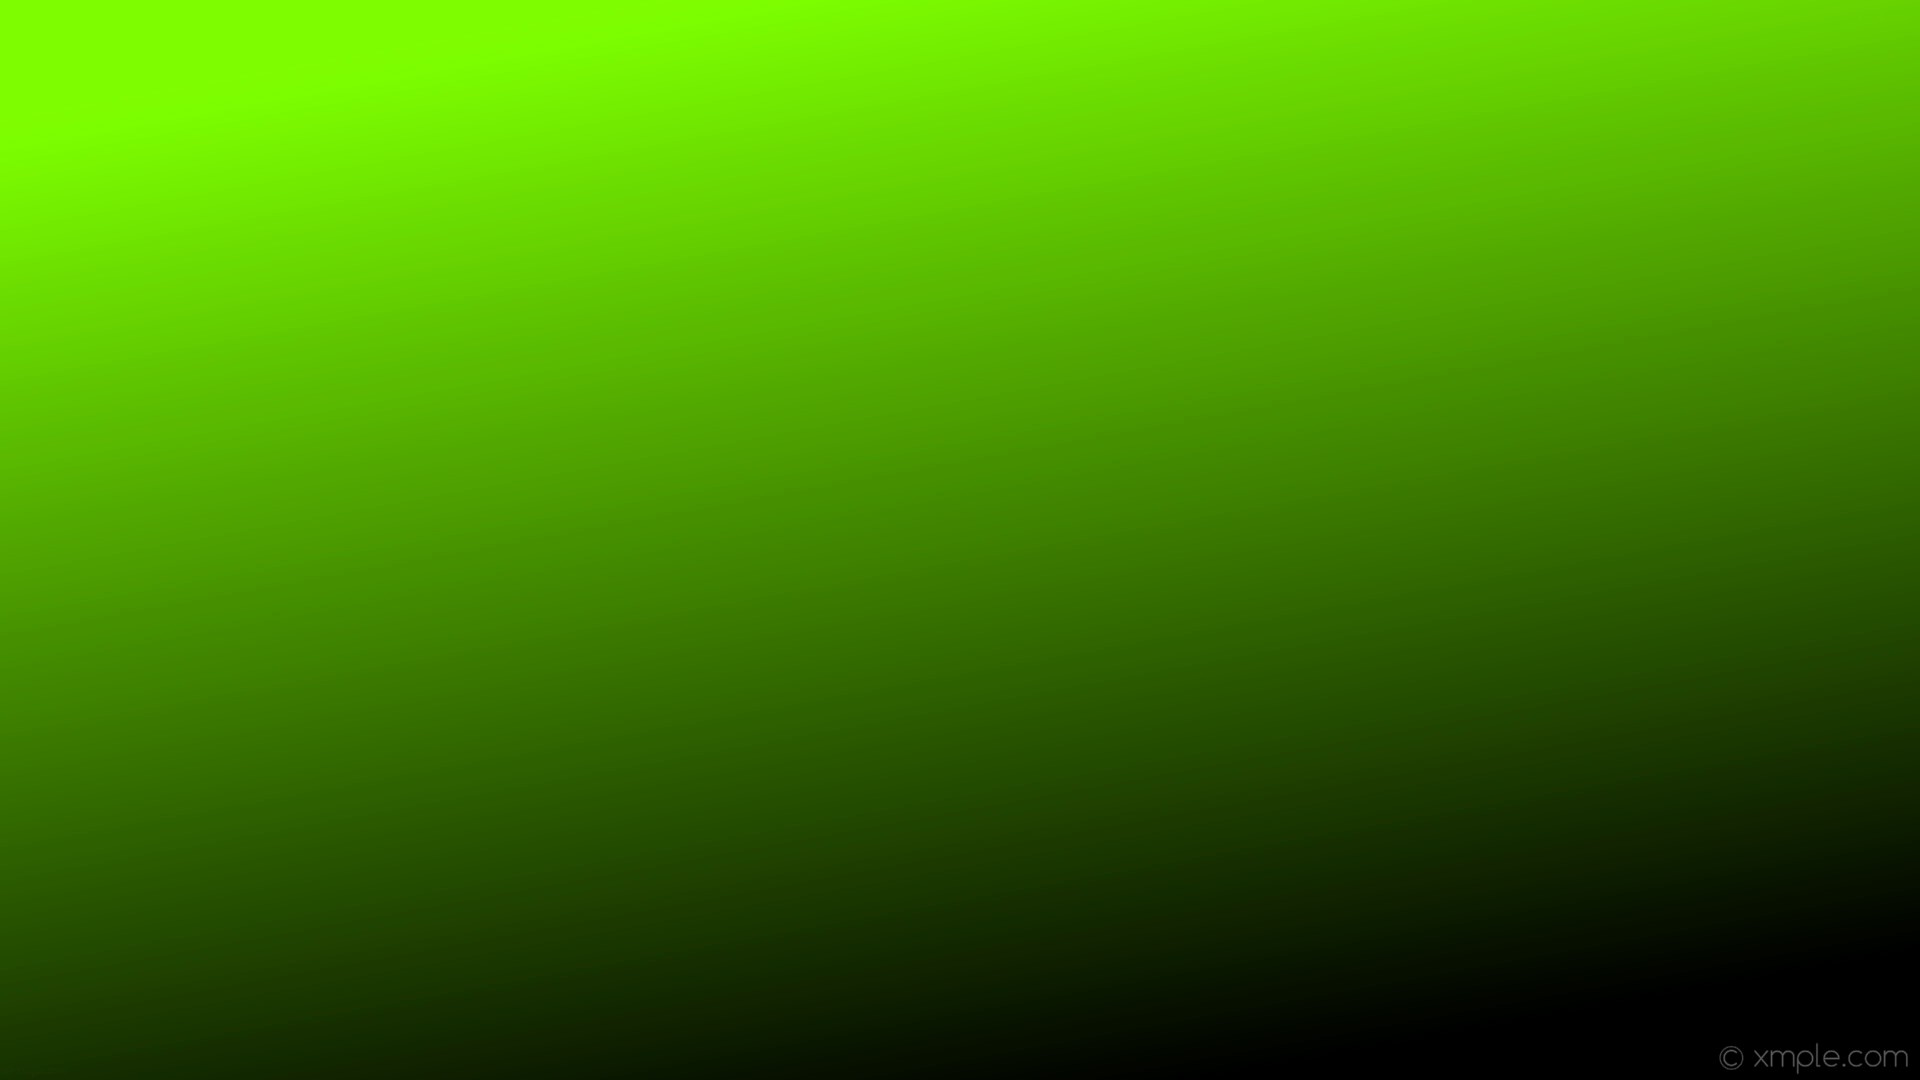 1920x1080, Green To Black Gradient Awesome Black Gra - Black And Green Gradient - HD Wallpaper 